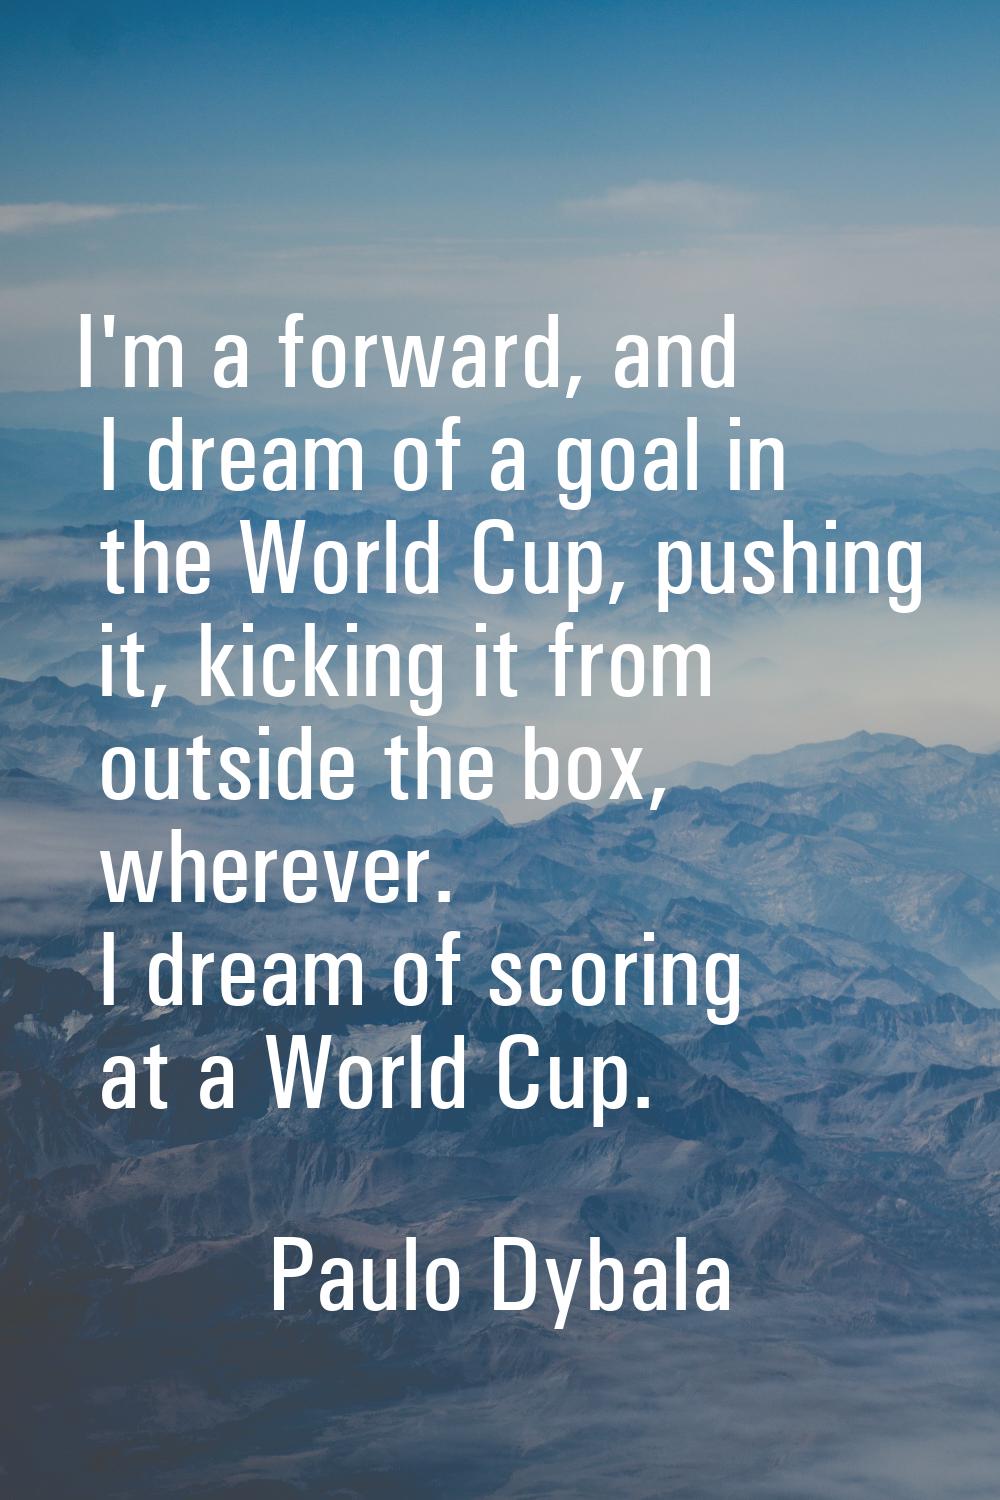 I'm a forward, and I dream of a goal in the World Cup, pushing it, kicking it from outside the box,